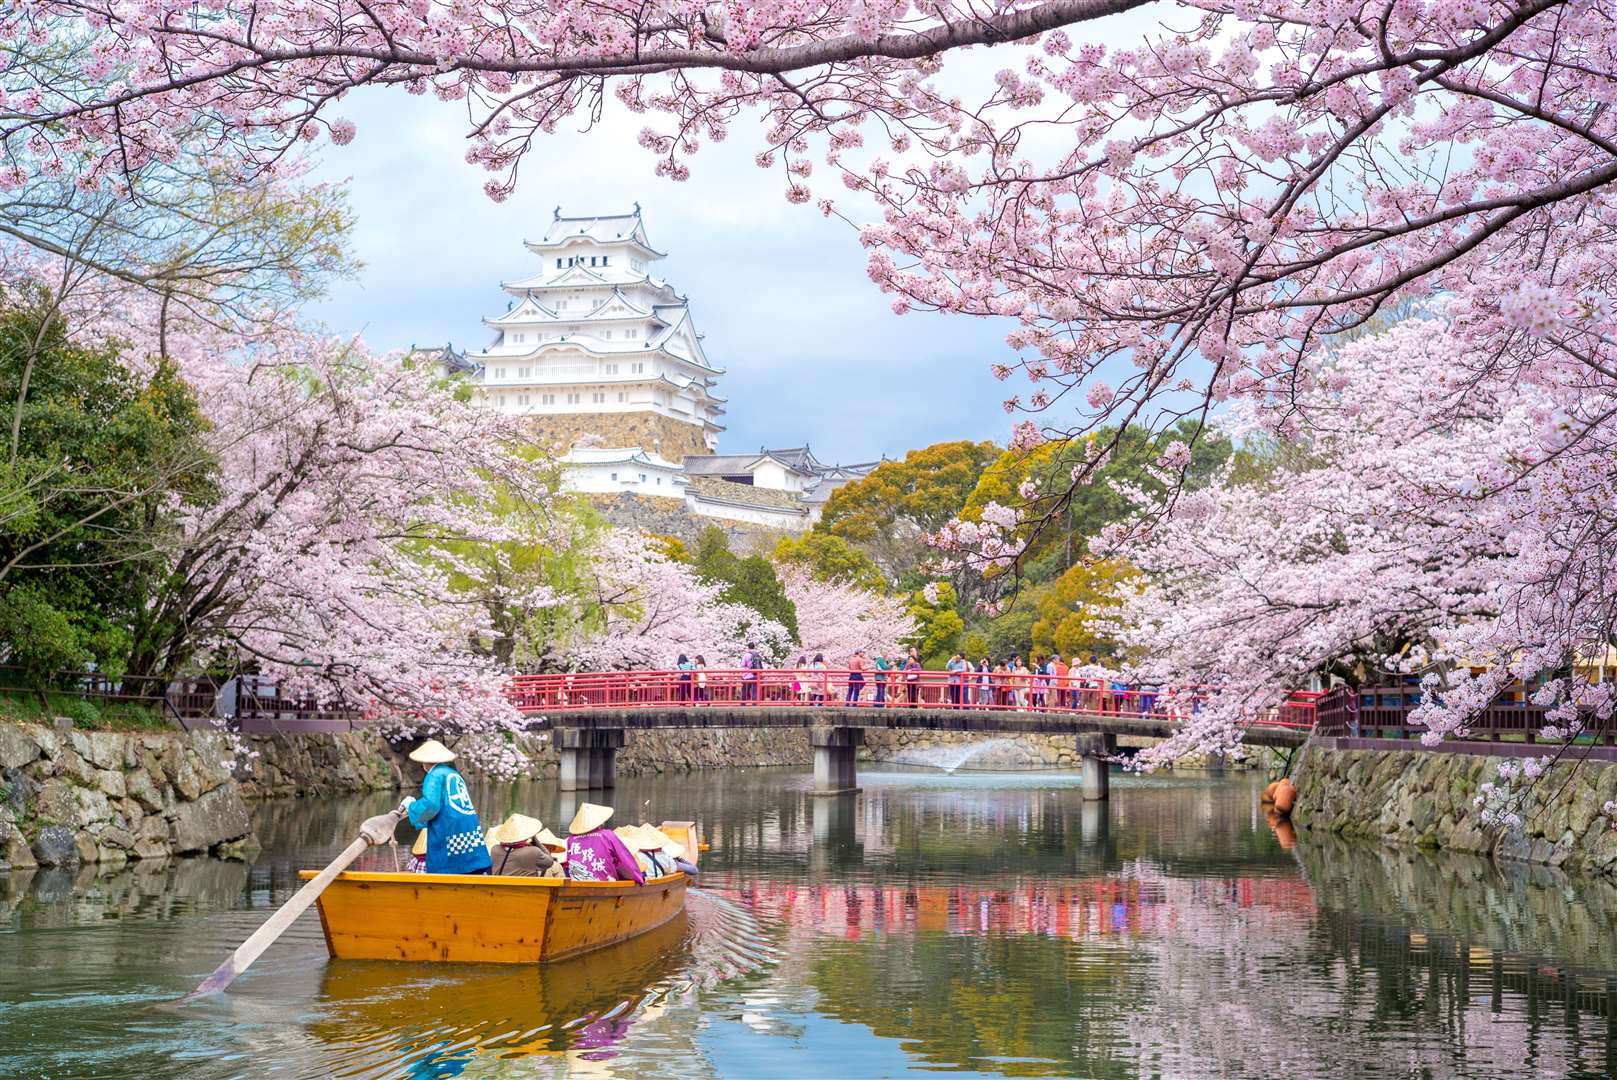 Hanami in Japan celebrates the cherry blossom and the arrival of spring. Image: Stock photo.